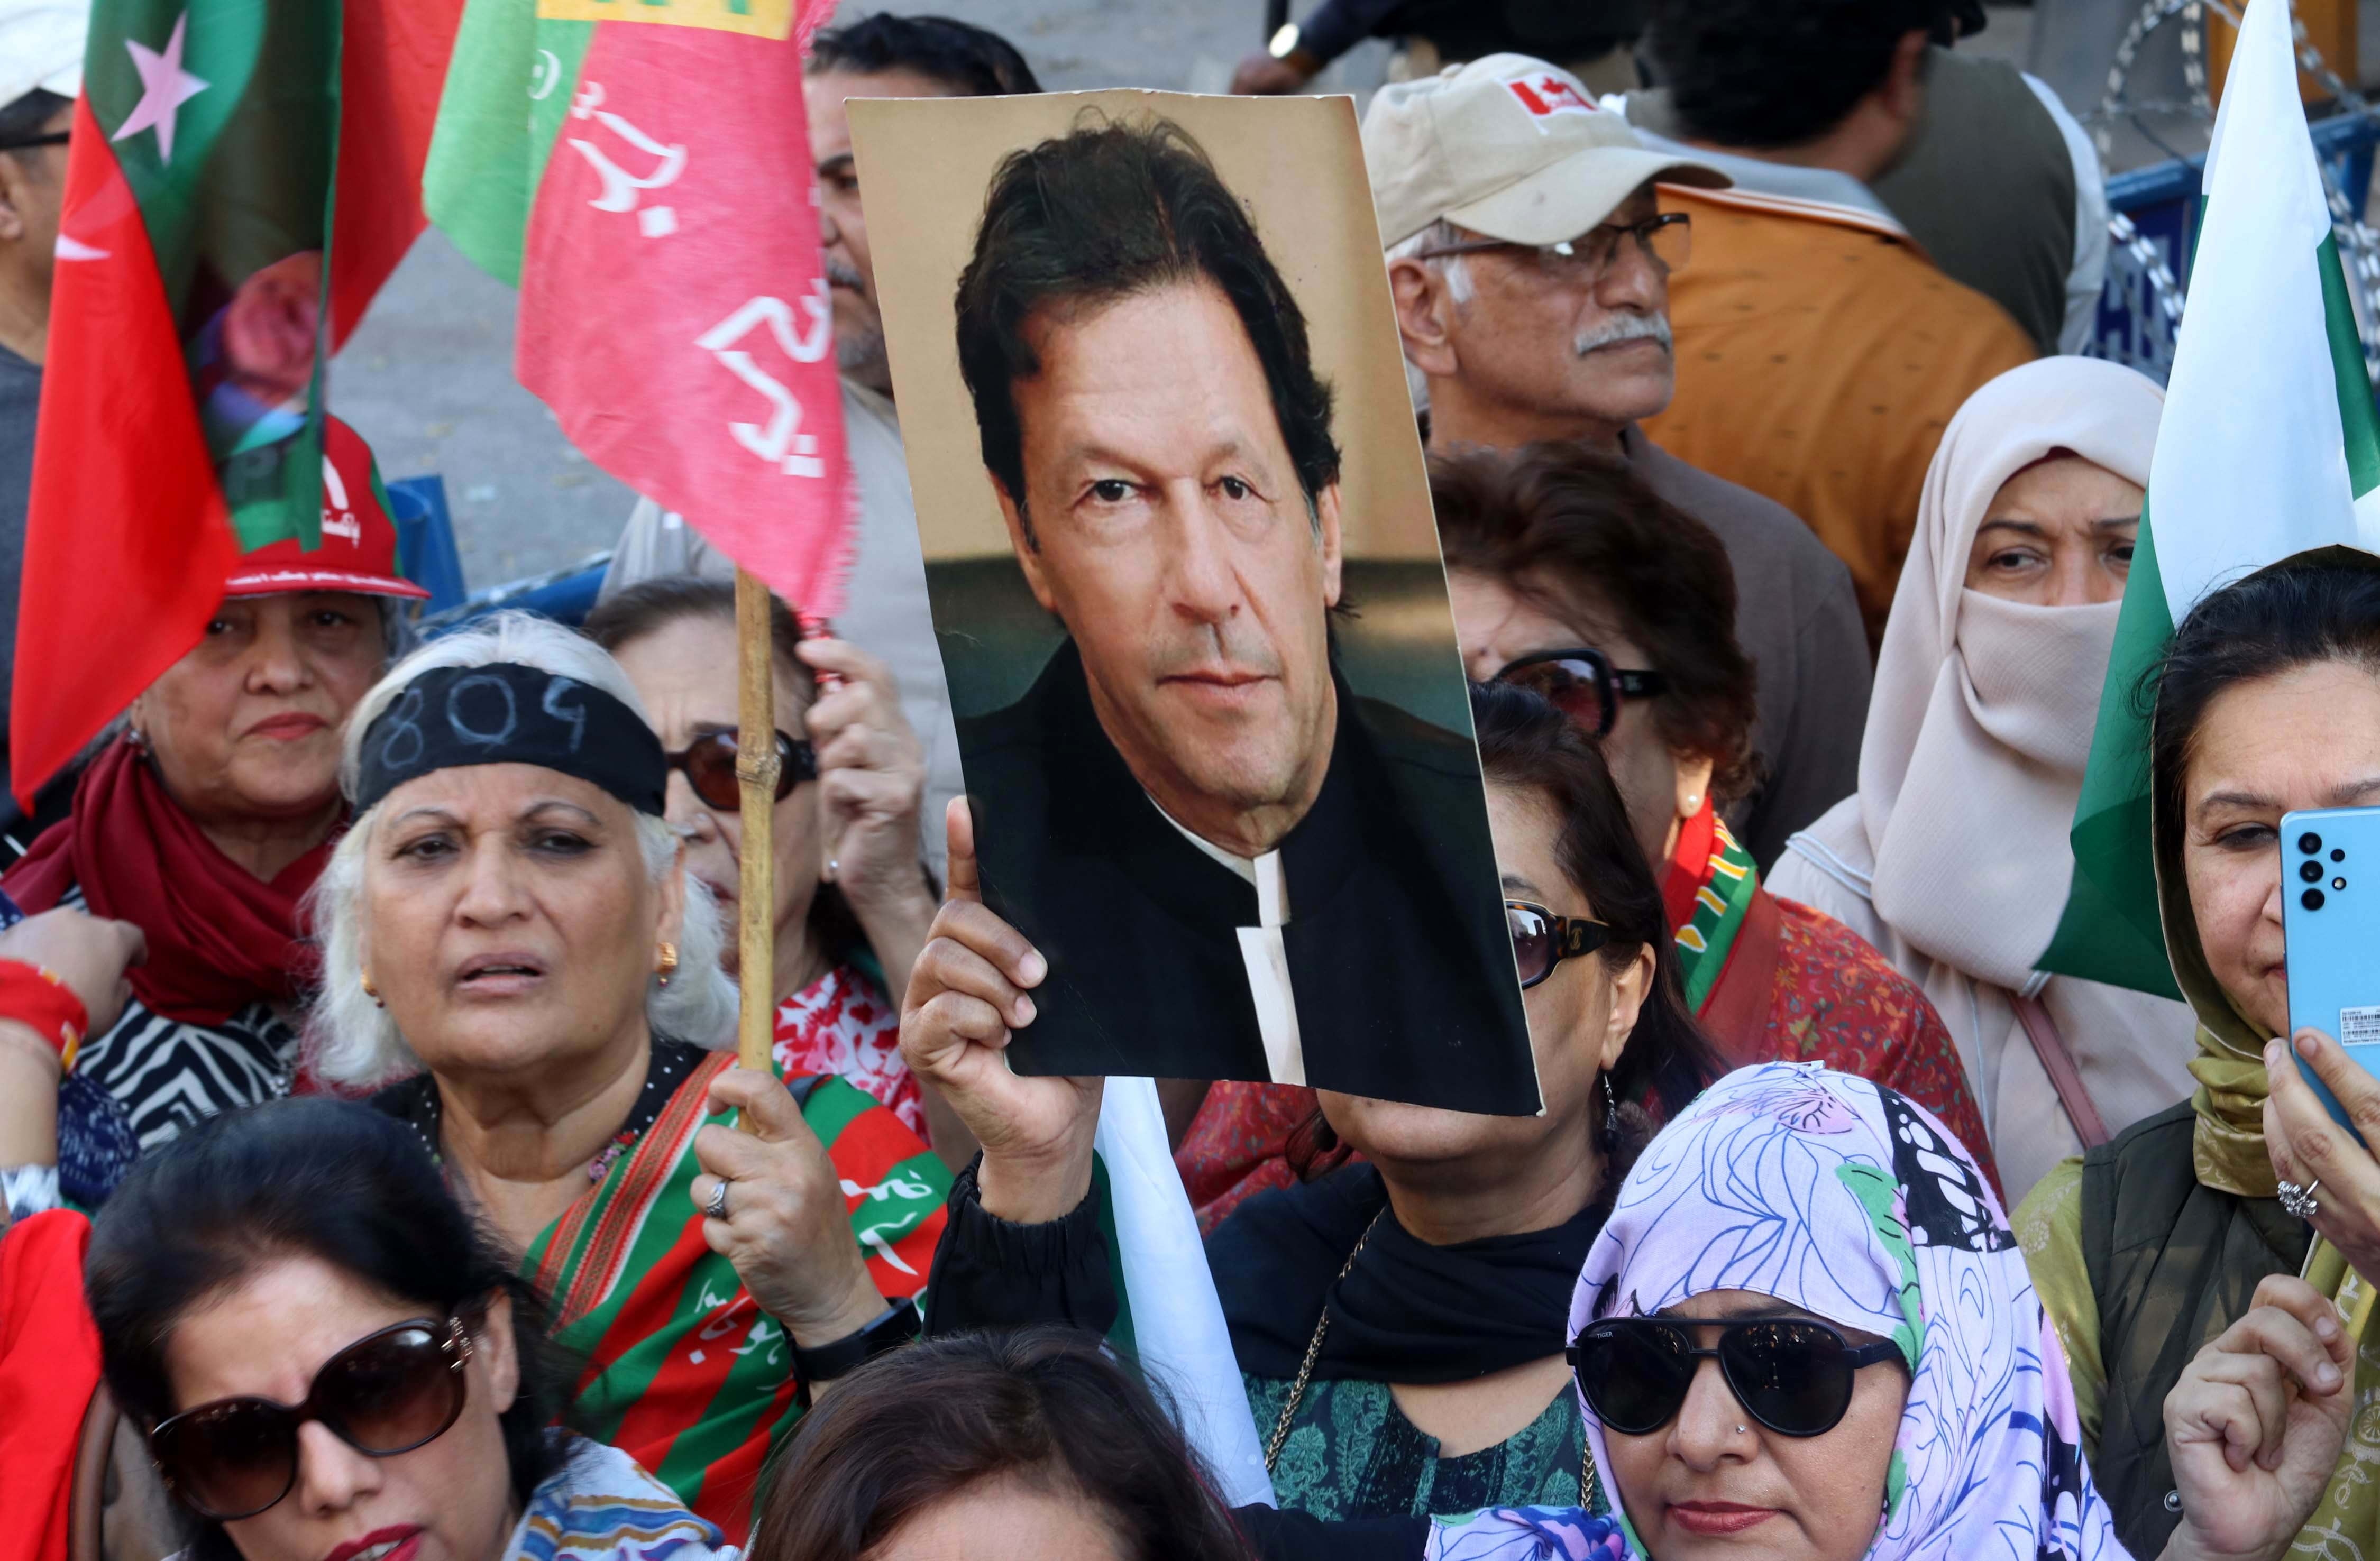 Supporters of the Pakistan Tehrik-e-Insaf (PTI) political party gather to protest against alleged rigging in the general elections, in Karachi, Pakistan